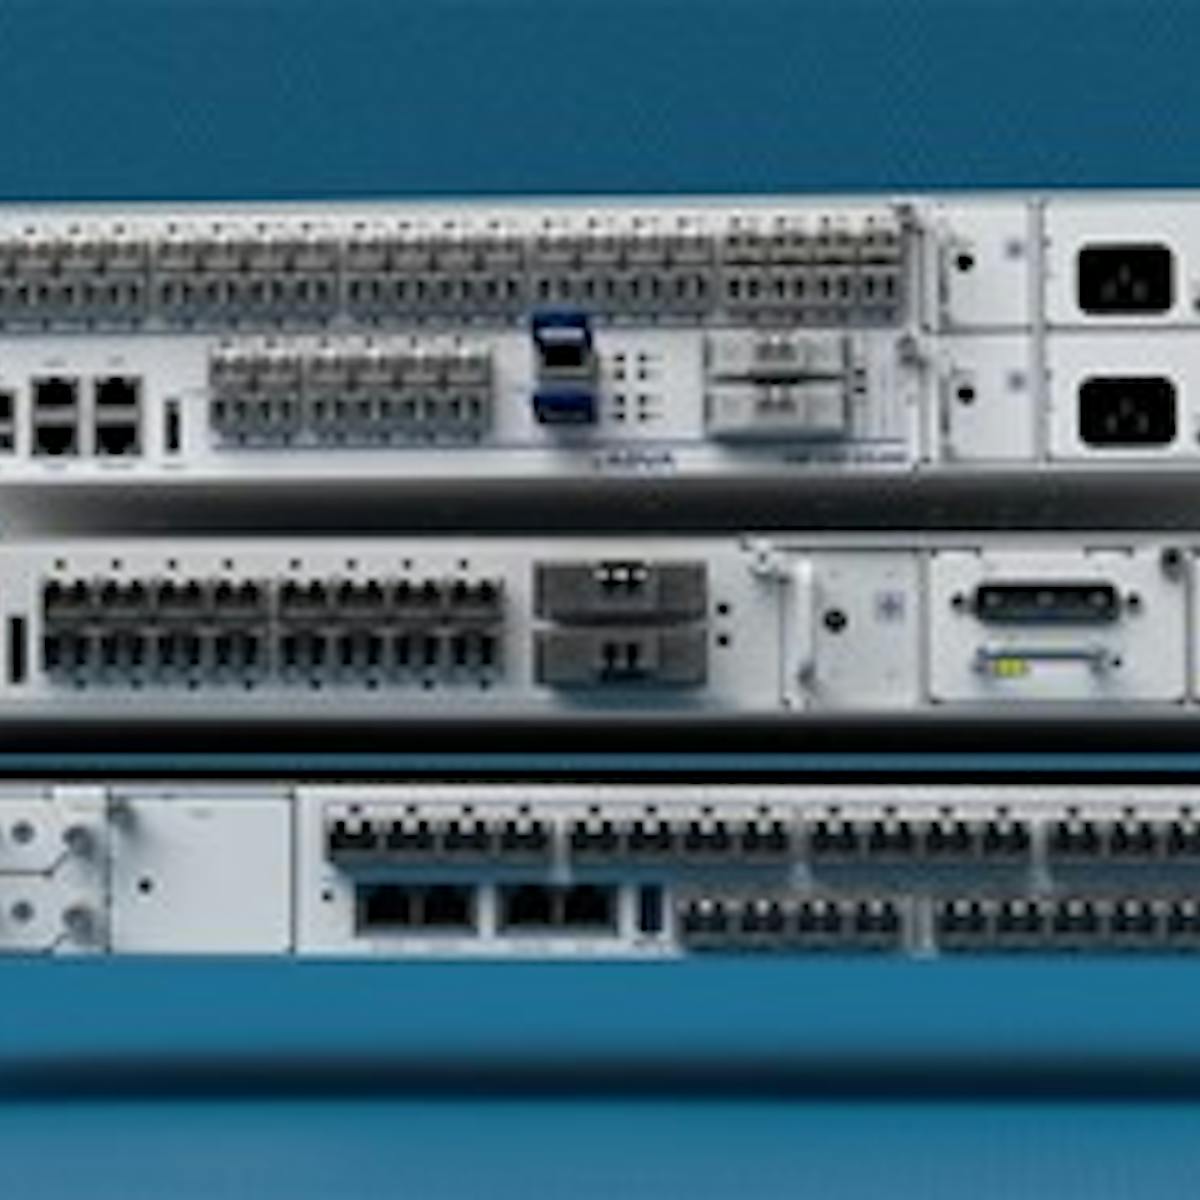 Quickline is using elements of ADVA&apos;s FSP 150 line in its broadband infrastructure deployment.